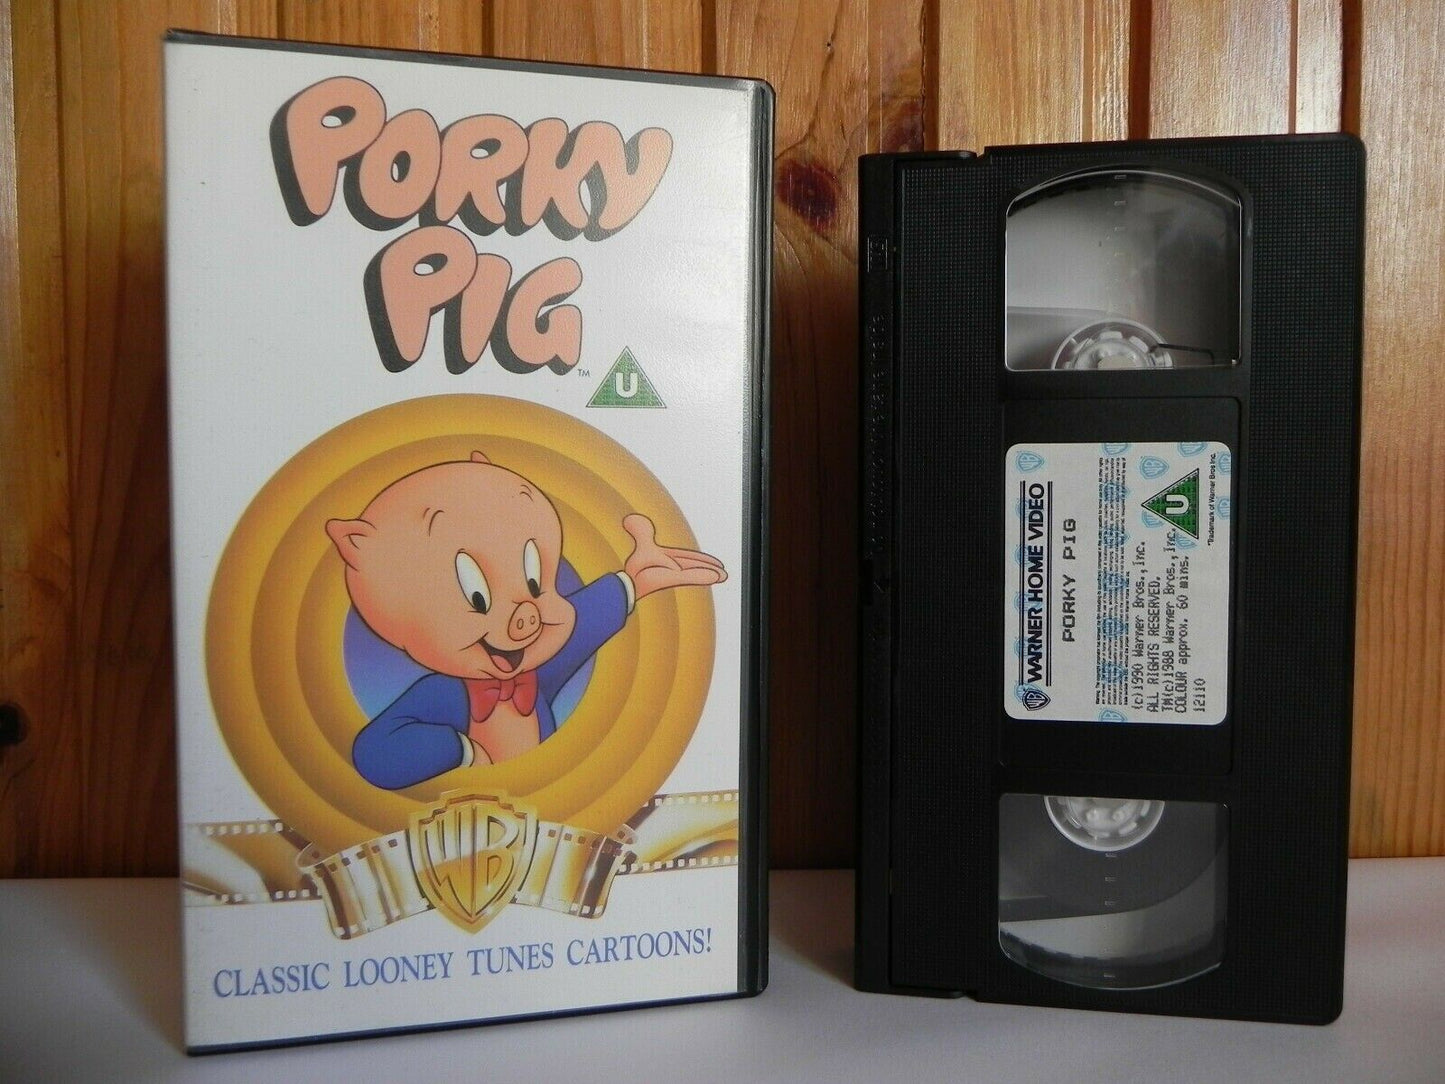 Porky Pig - Warner Home - Classic Looney Tunes - Animated - Children's - Pal VHS-